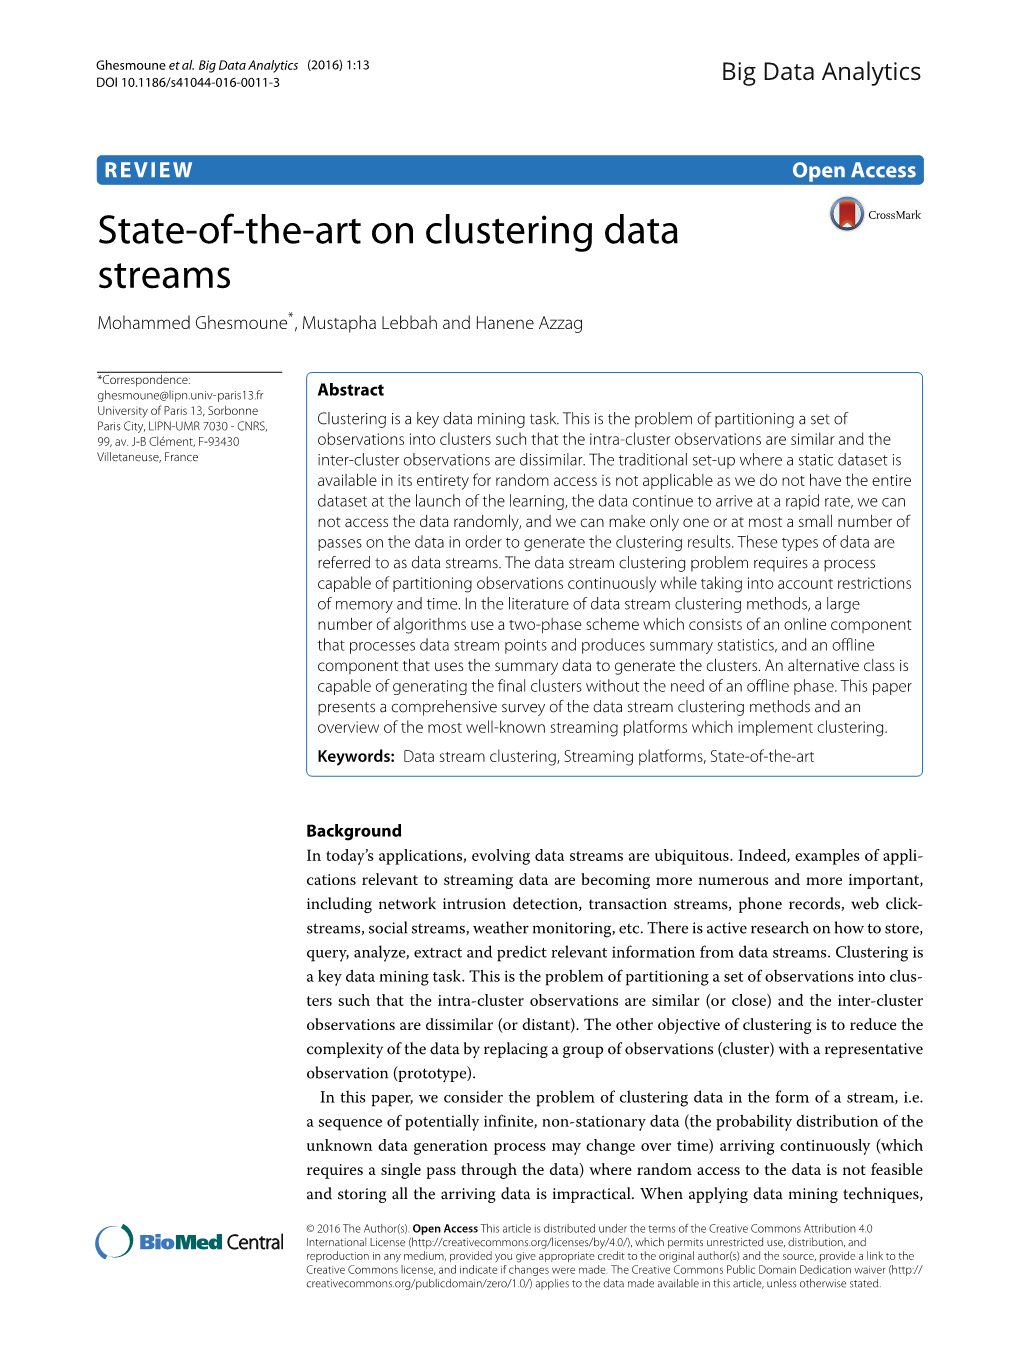 State-Of-The-Art on Clustering Data Streams Mohammed Ghesmoune*, Mustapha Lebbah and Hanene Azzag